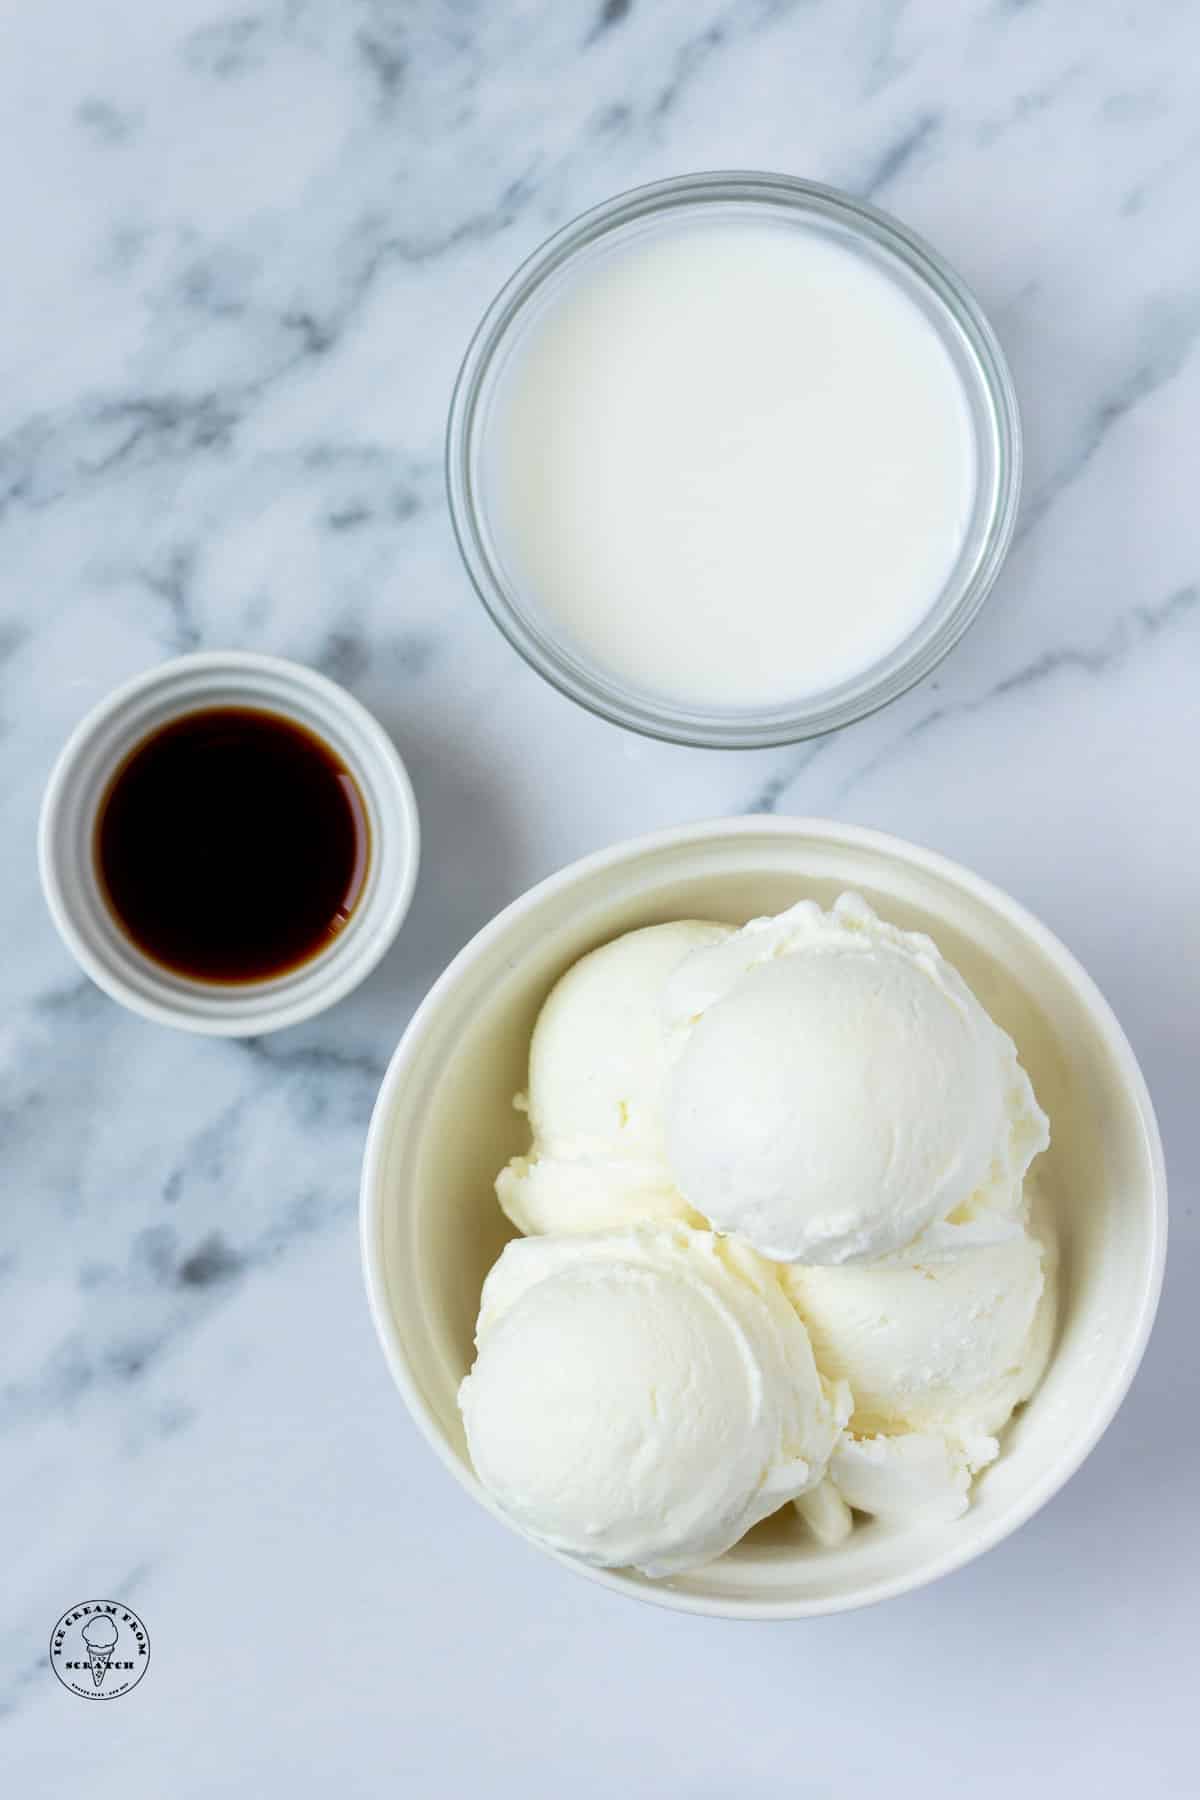 a bowl of vanilla ice cream, a bowl of milk, and a bowl of vanilla extract on a marble counter, viewed from above